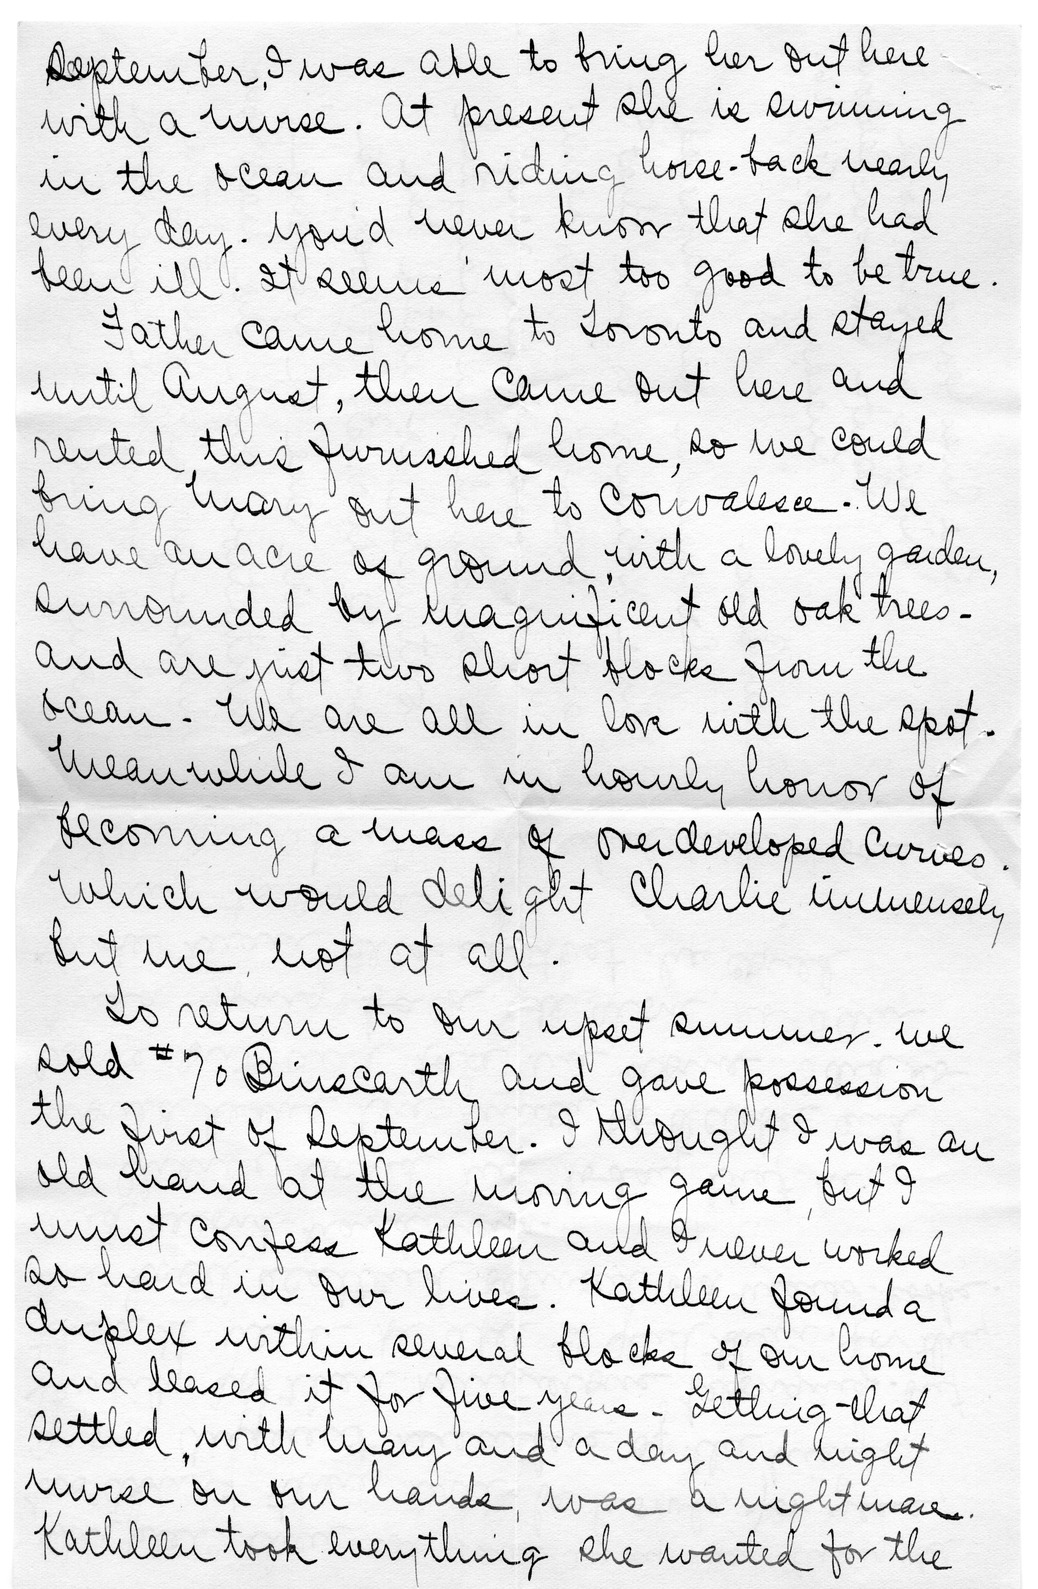 Letter from Arry M. Calhoun to Bess W. Truman